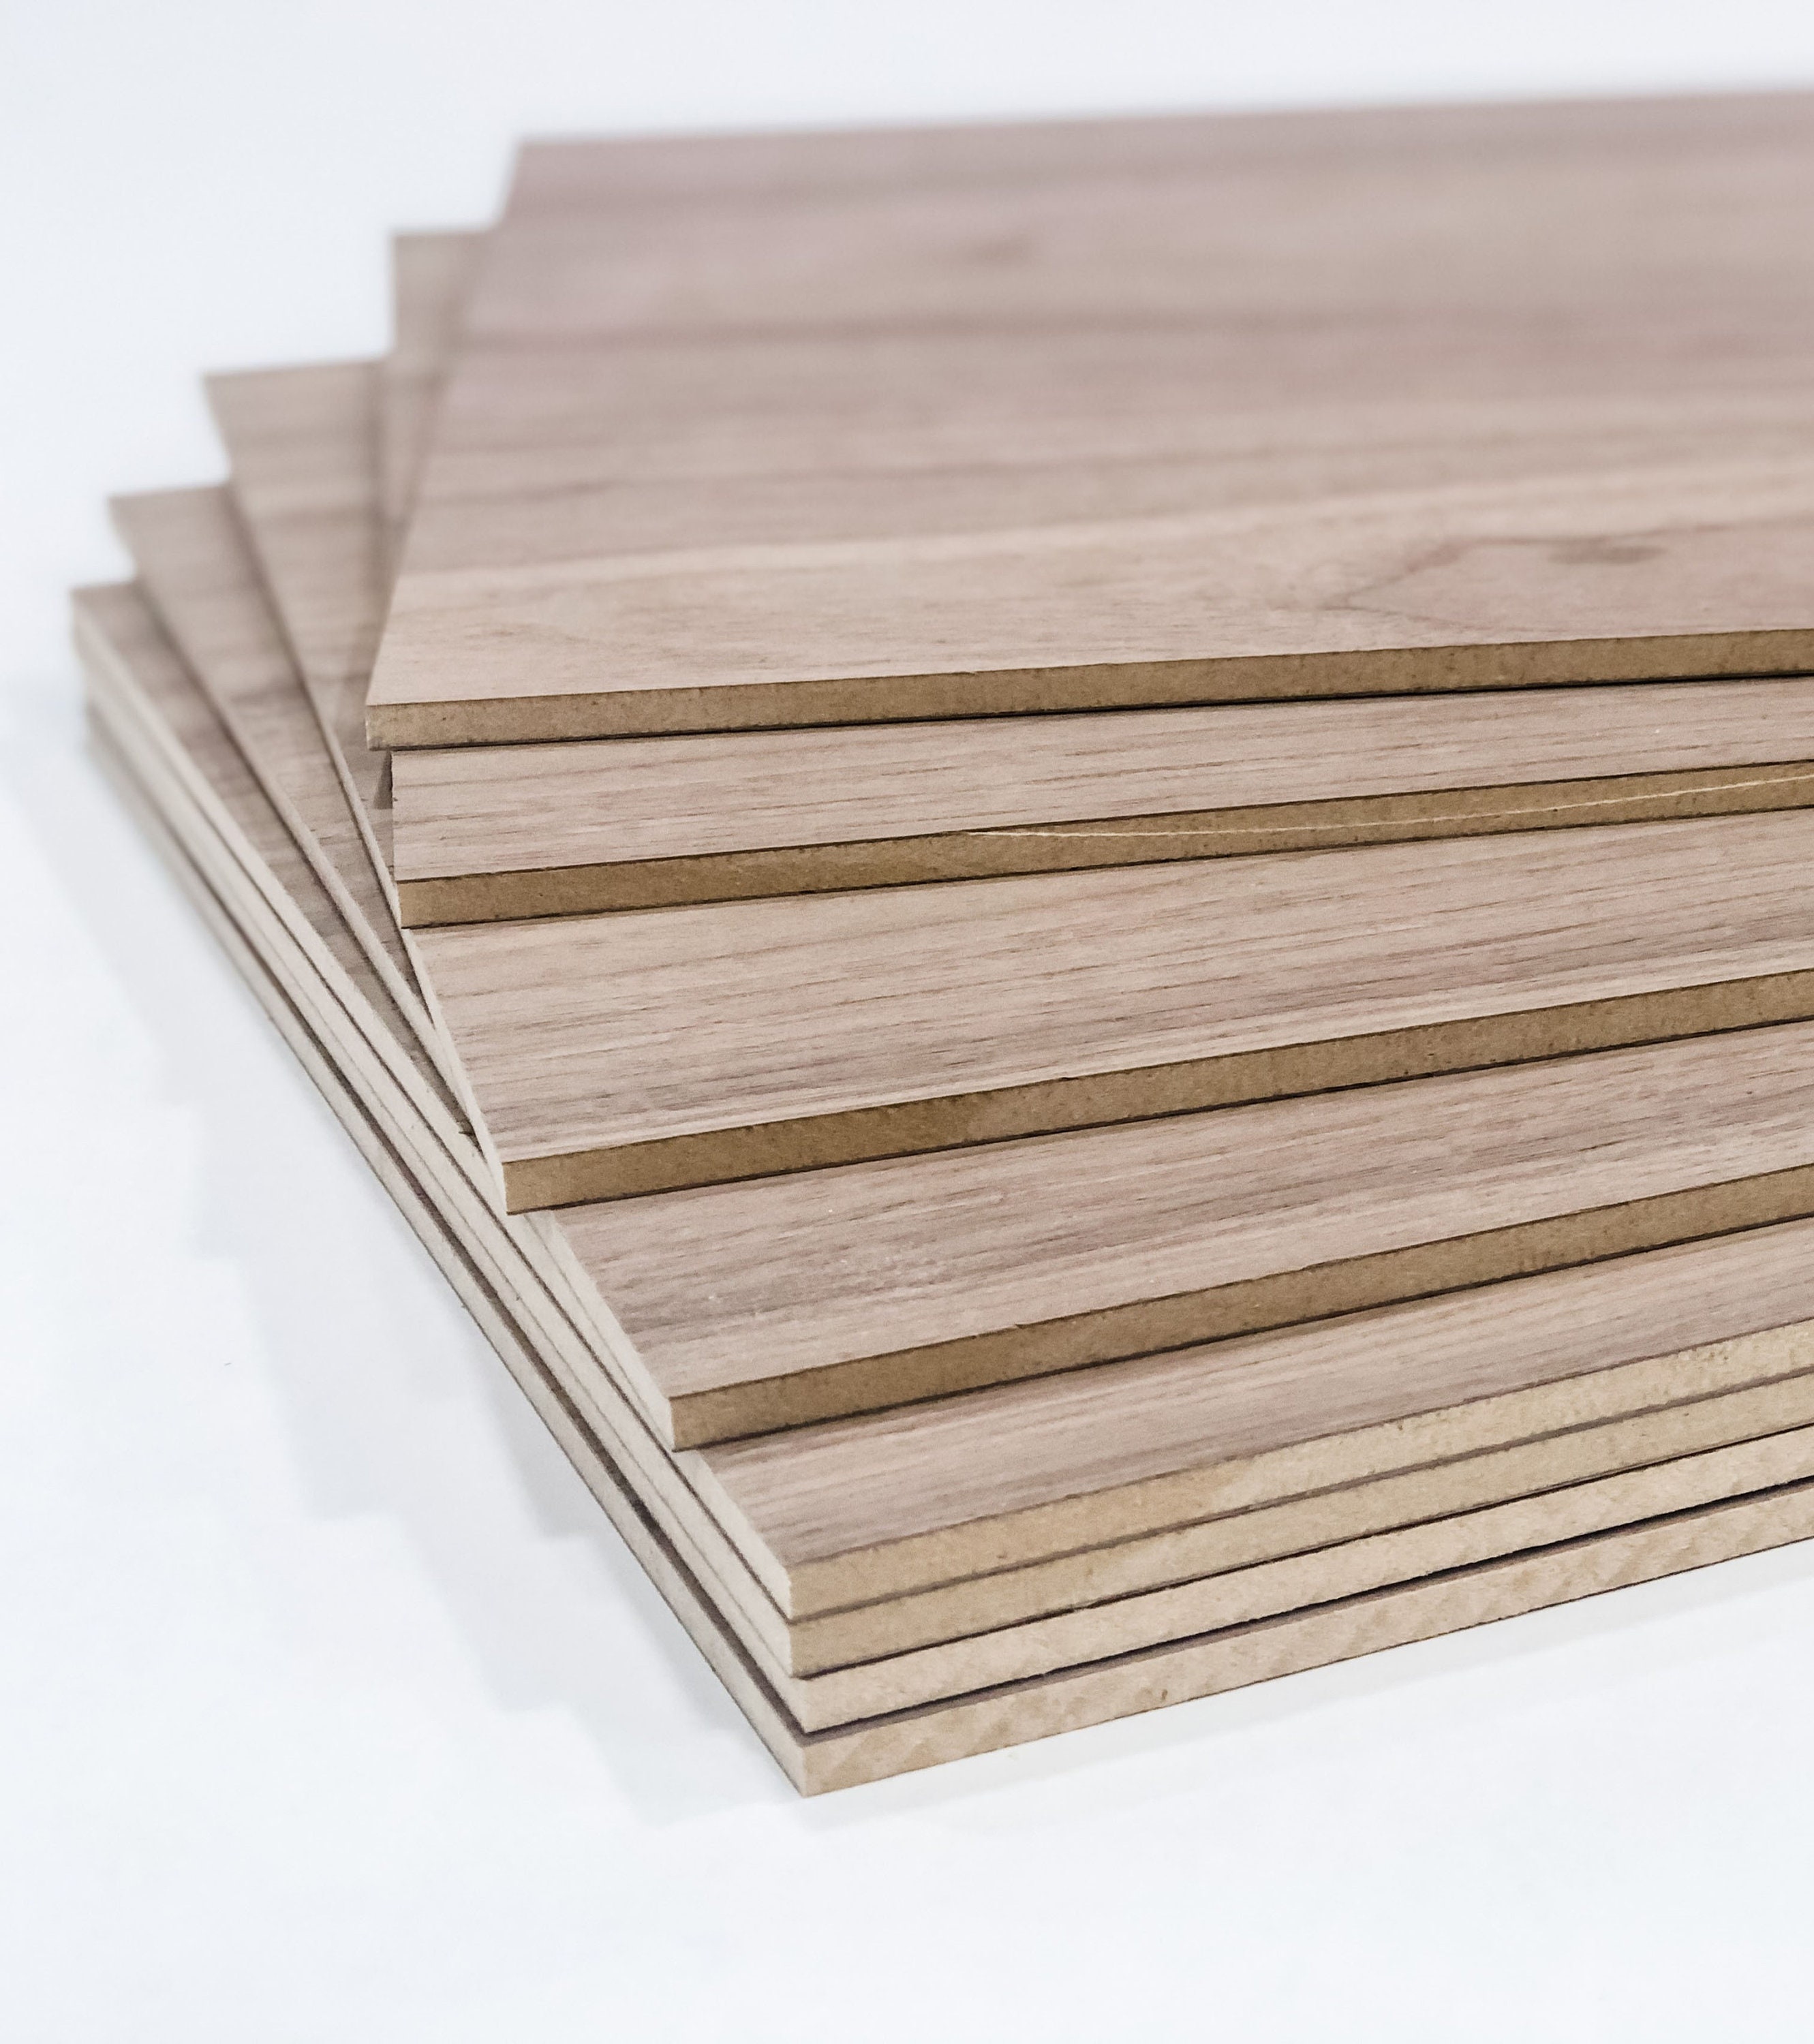 Basswood Laser Plywood 1/4, 12x18 Inch Sheets, 6mm Laser Wood, CNC Laser  Material, Glowforge Ready Wood Sheets, Laser Ready Supplies 